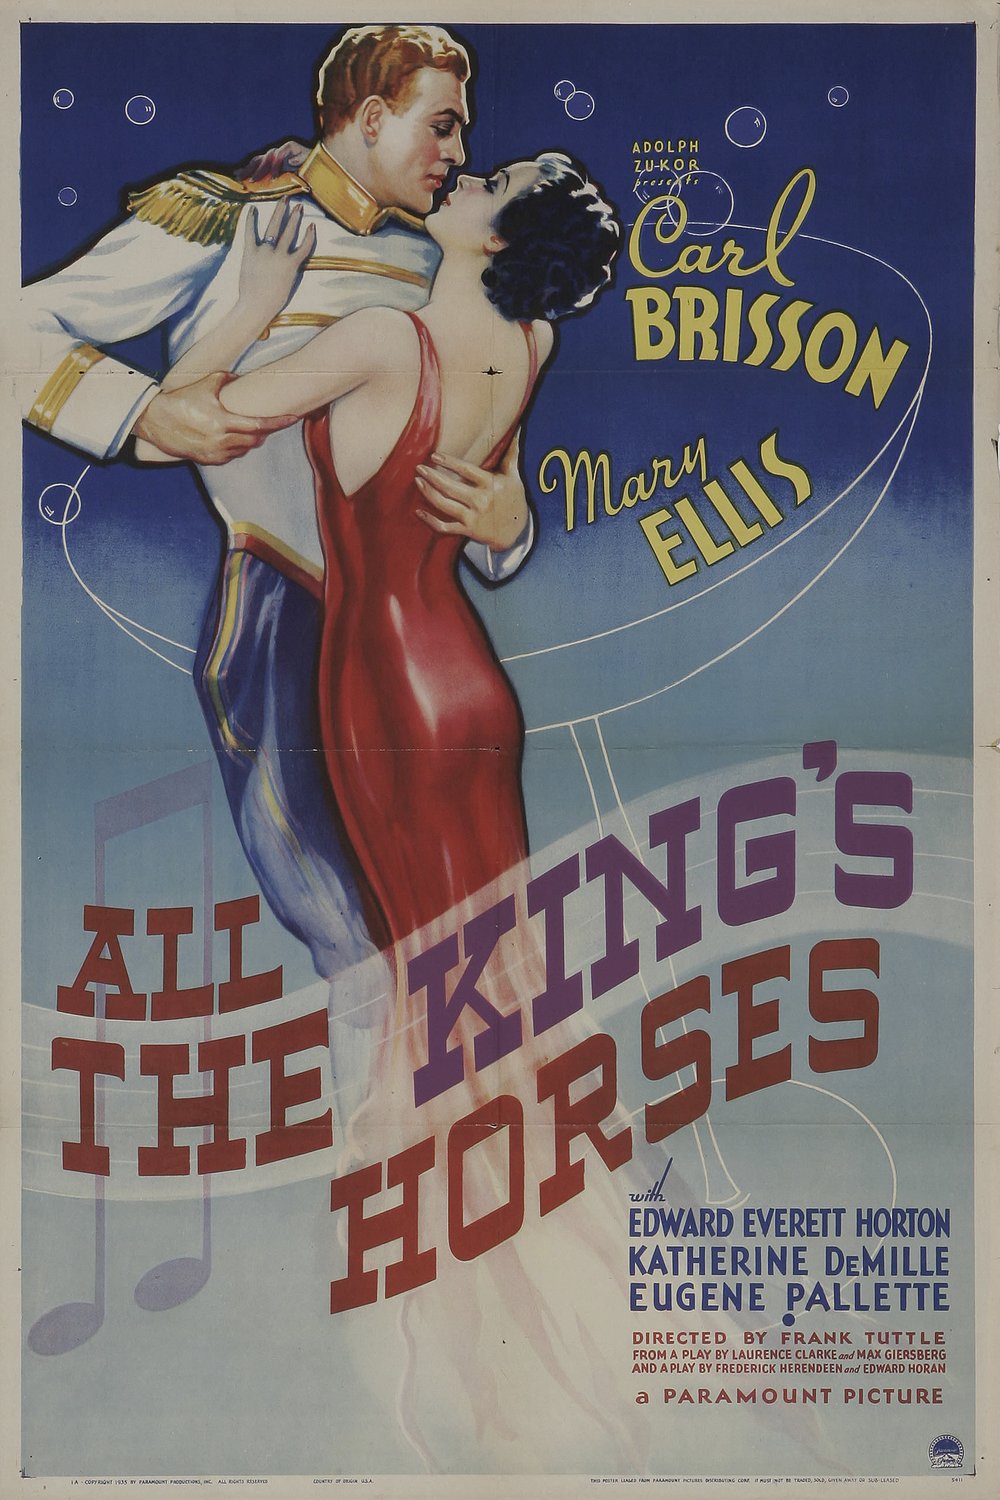 Poster of the movie All the King's Horses